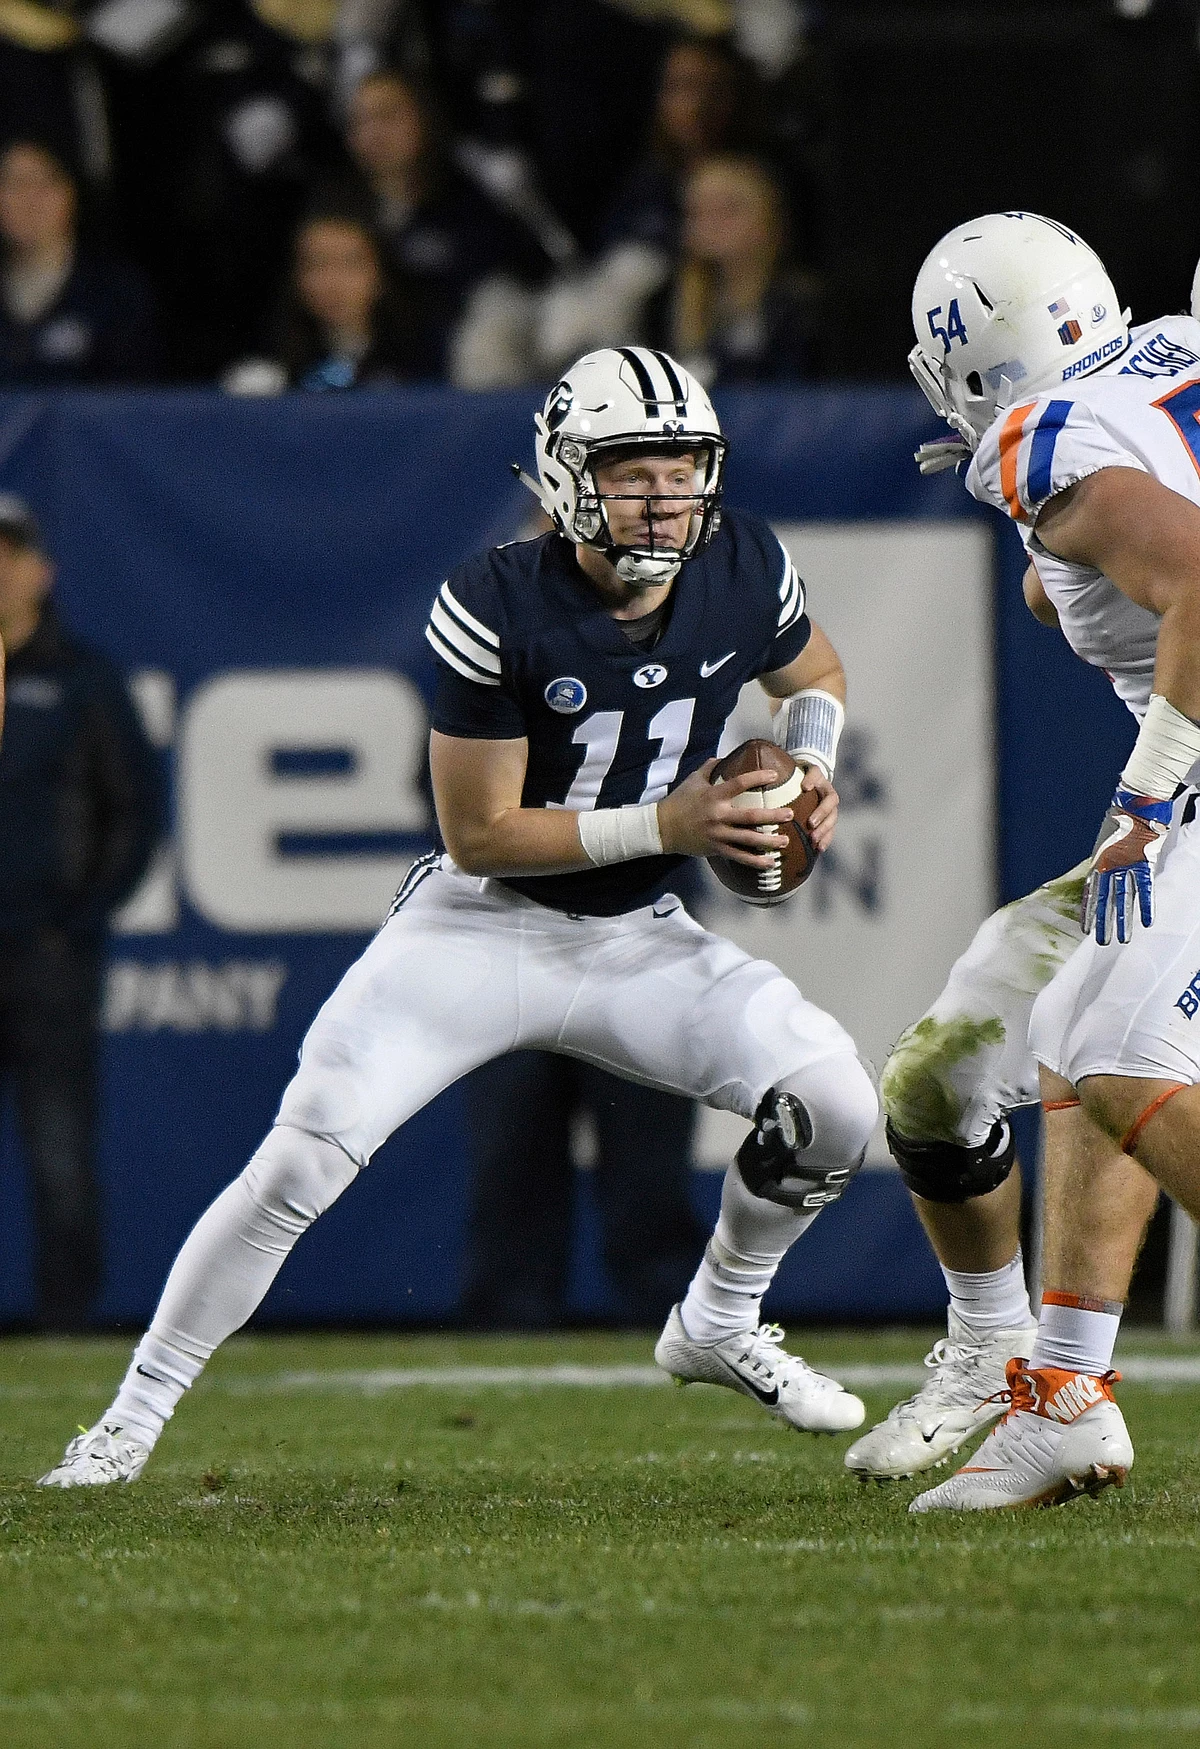 Built Bar Will Pay Tuition for 36 BYU Football WalkOns